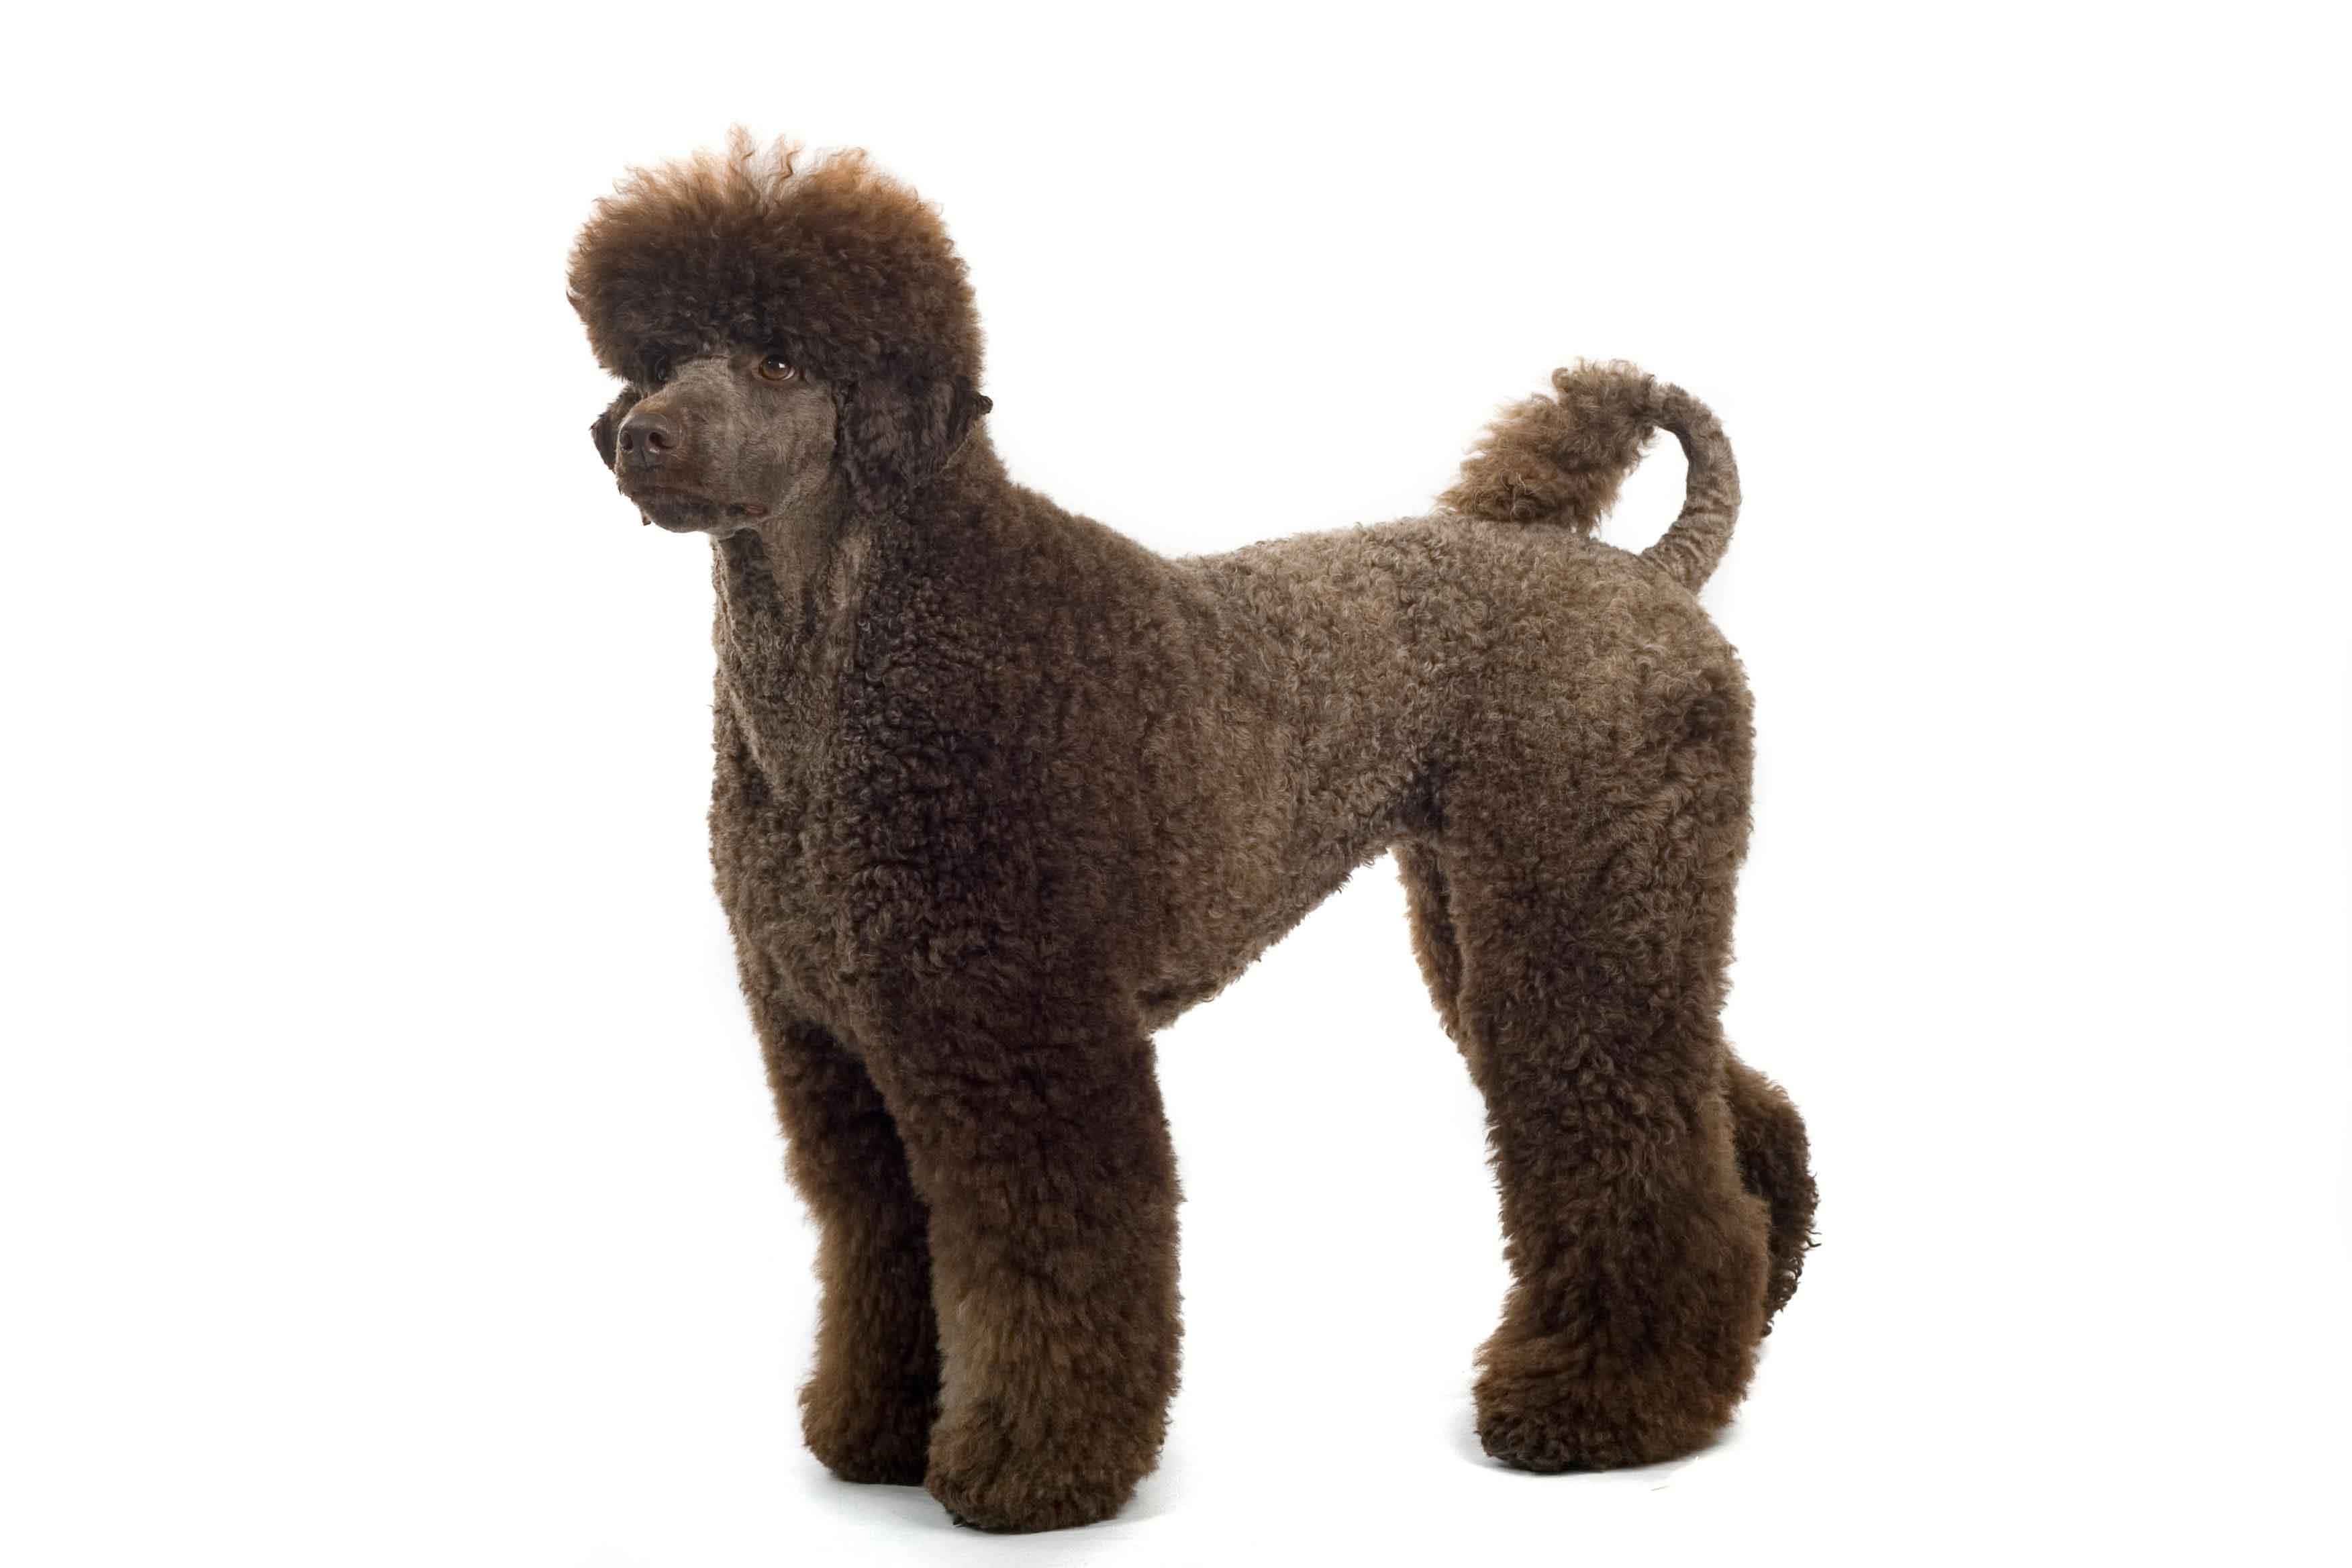 poodle cuts and hairstyles | petcarerx